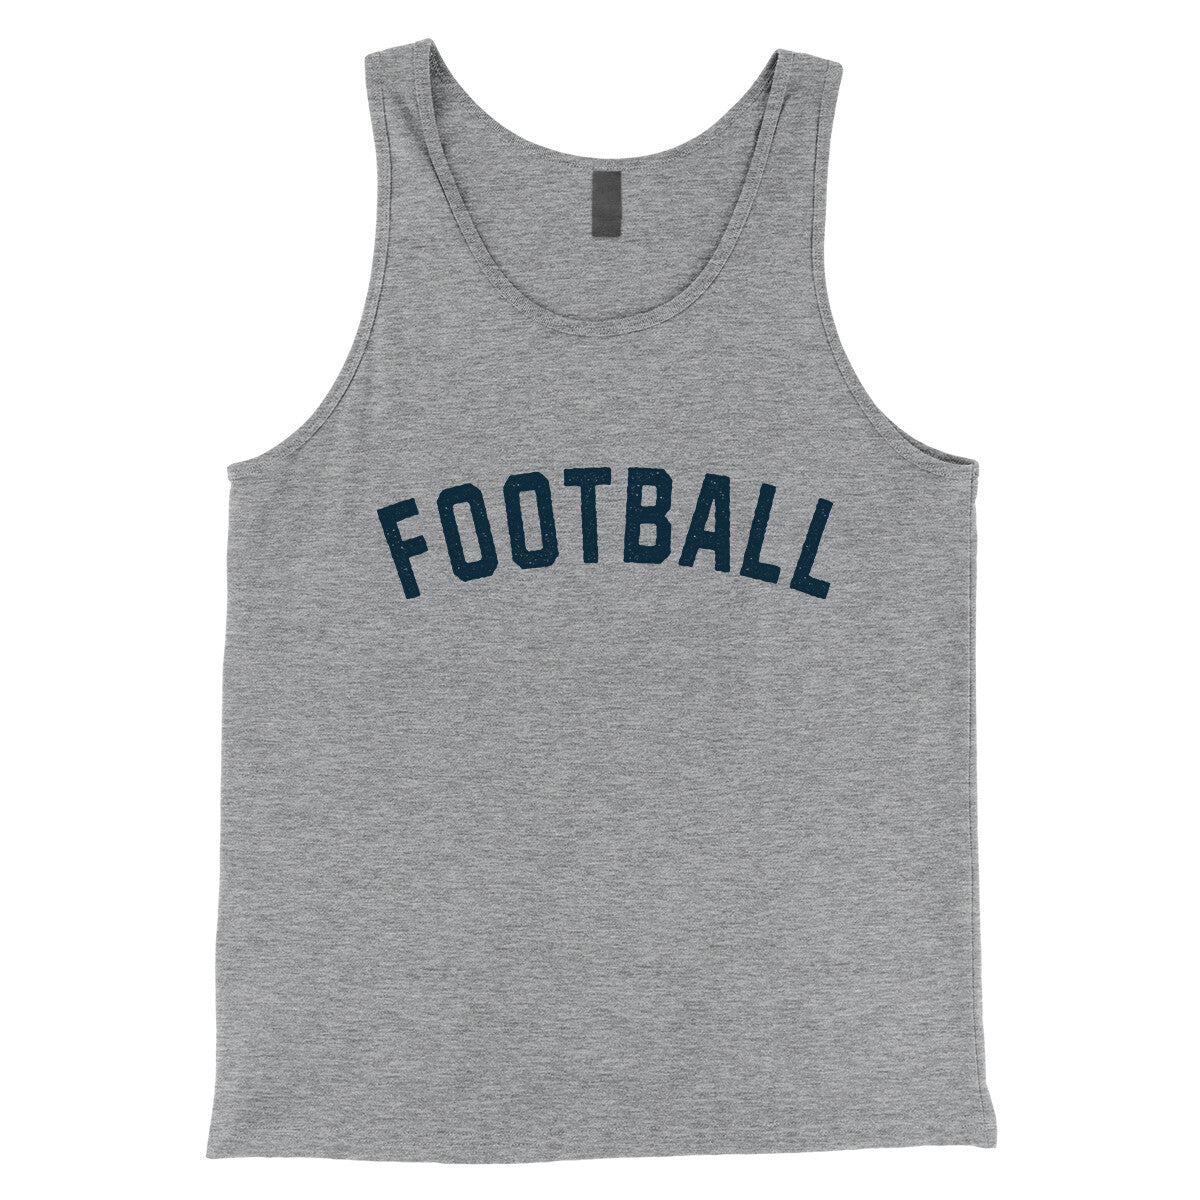 Football in Athletic Heather Color